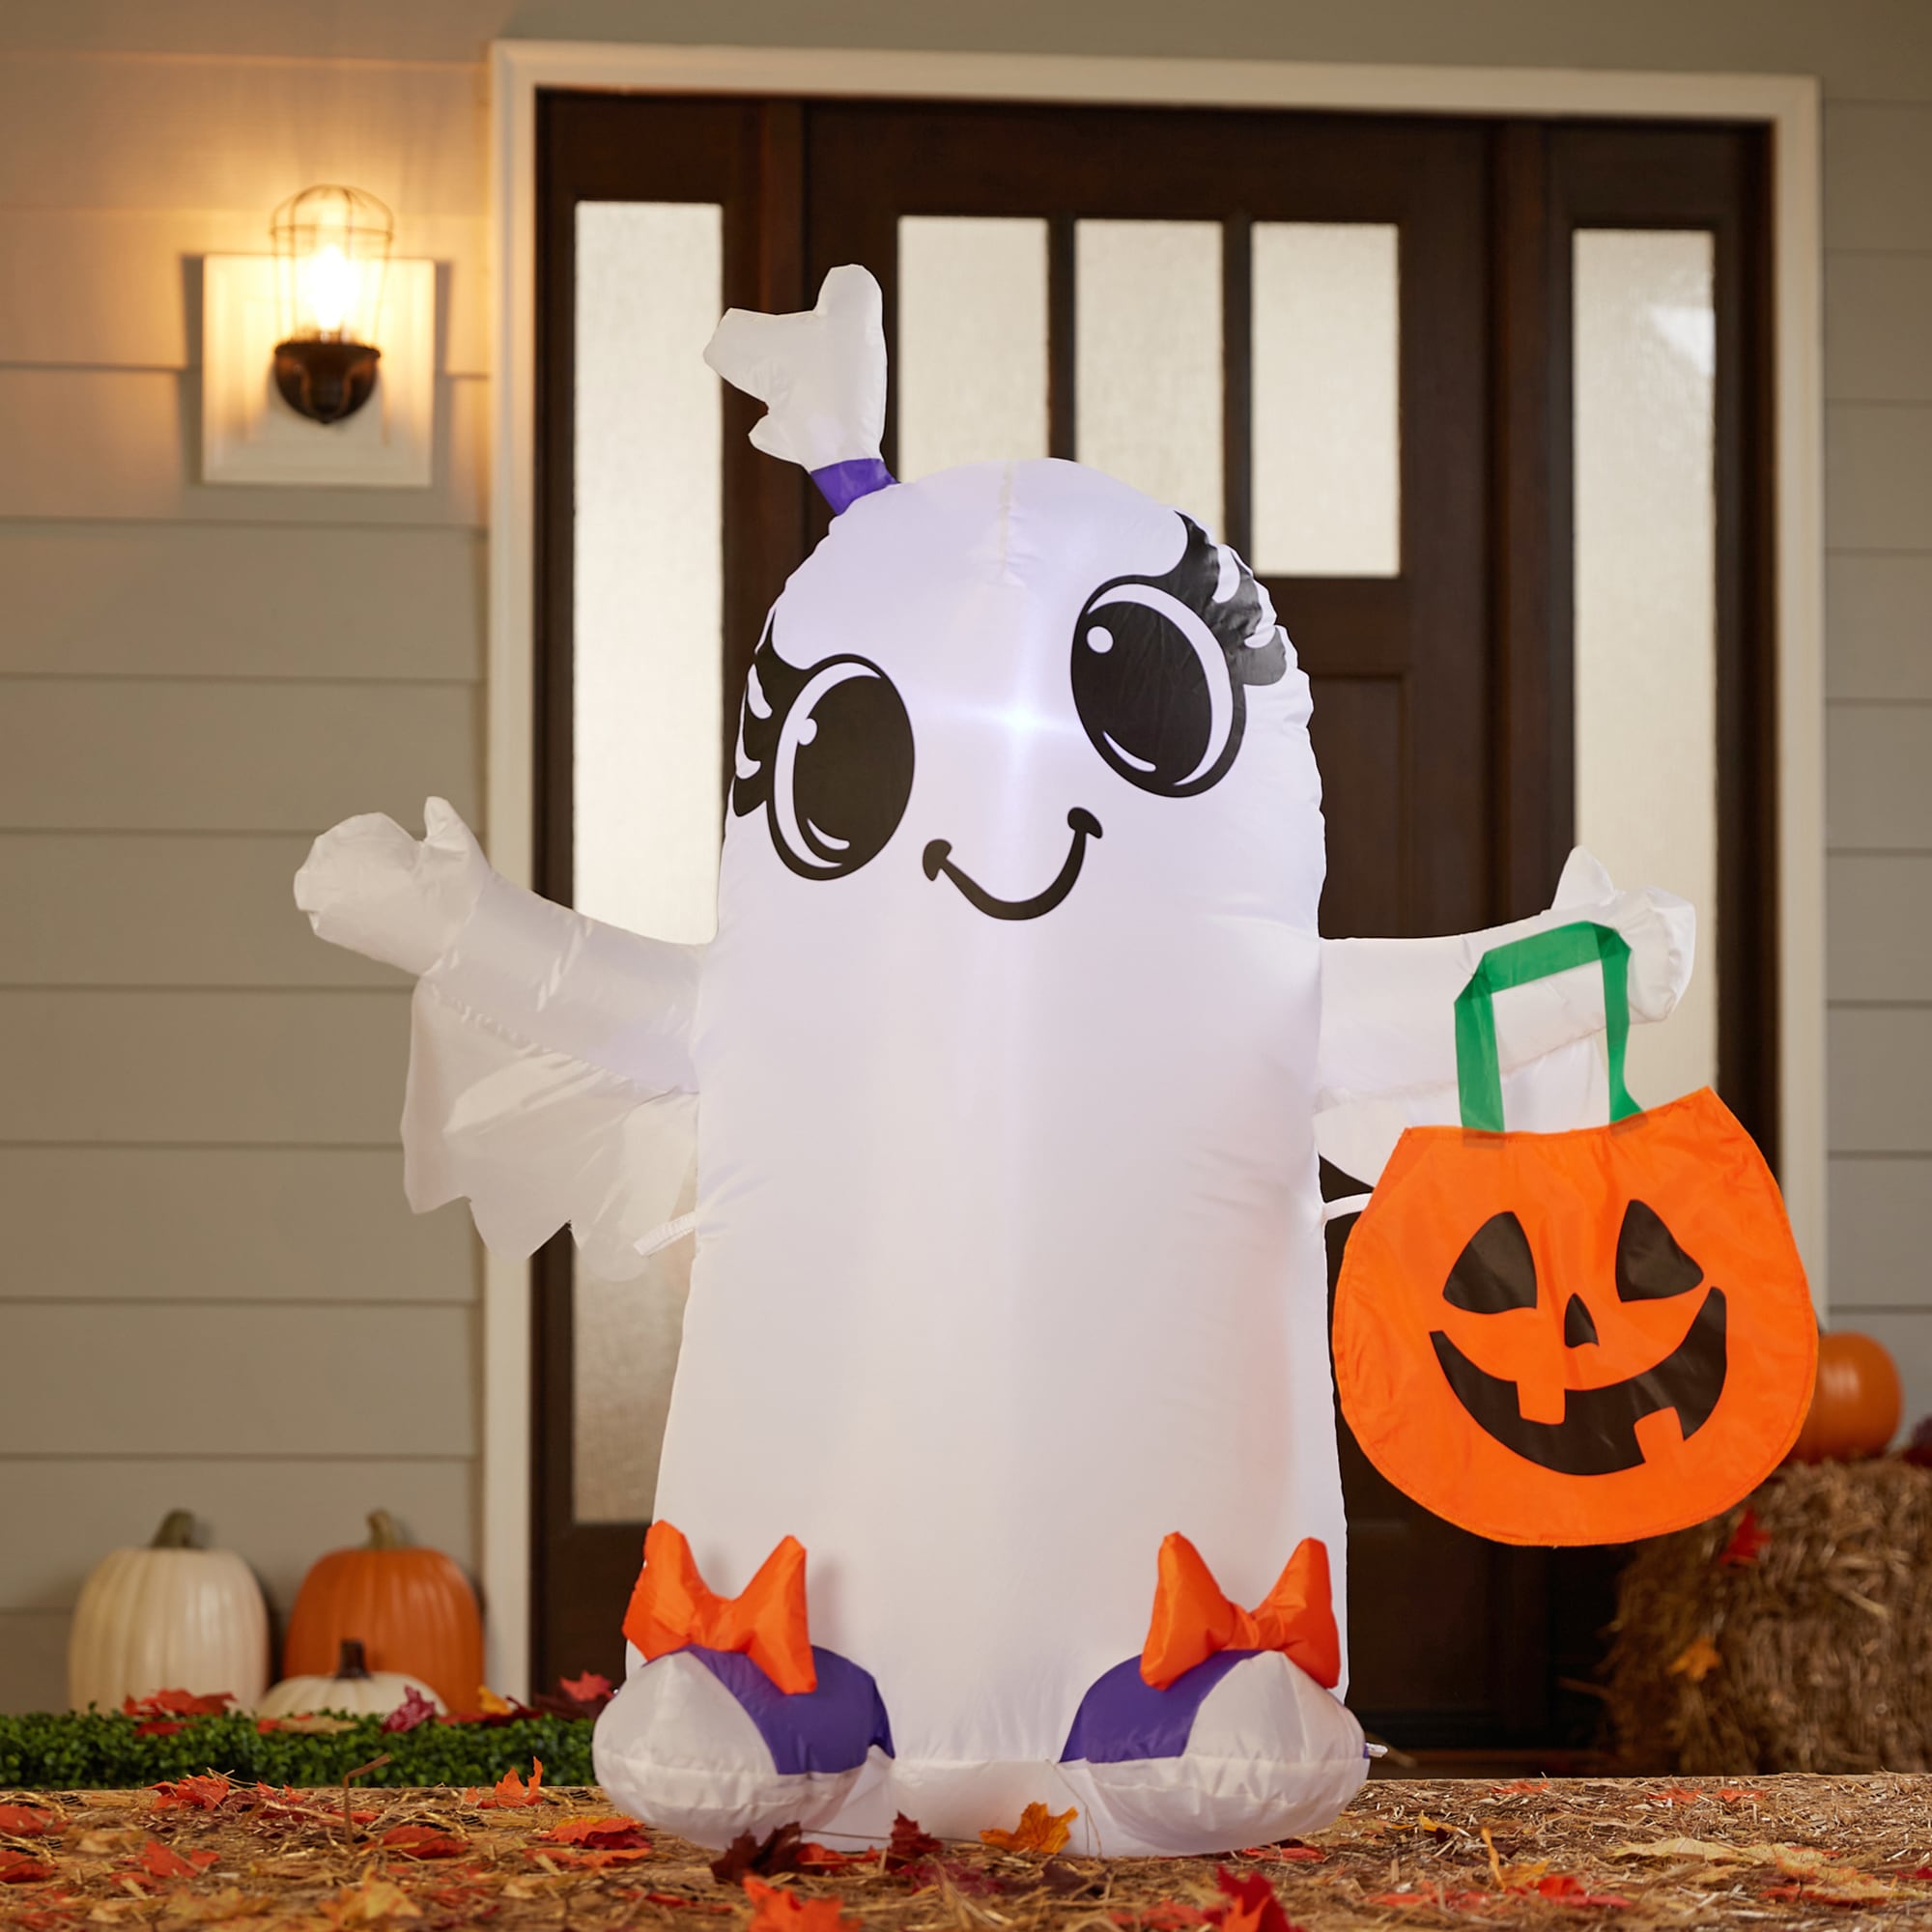 Gemmy 3.5-ft Lighted Ghost Inflatable at Lowes.com